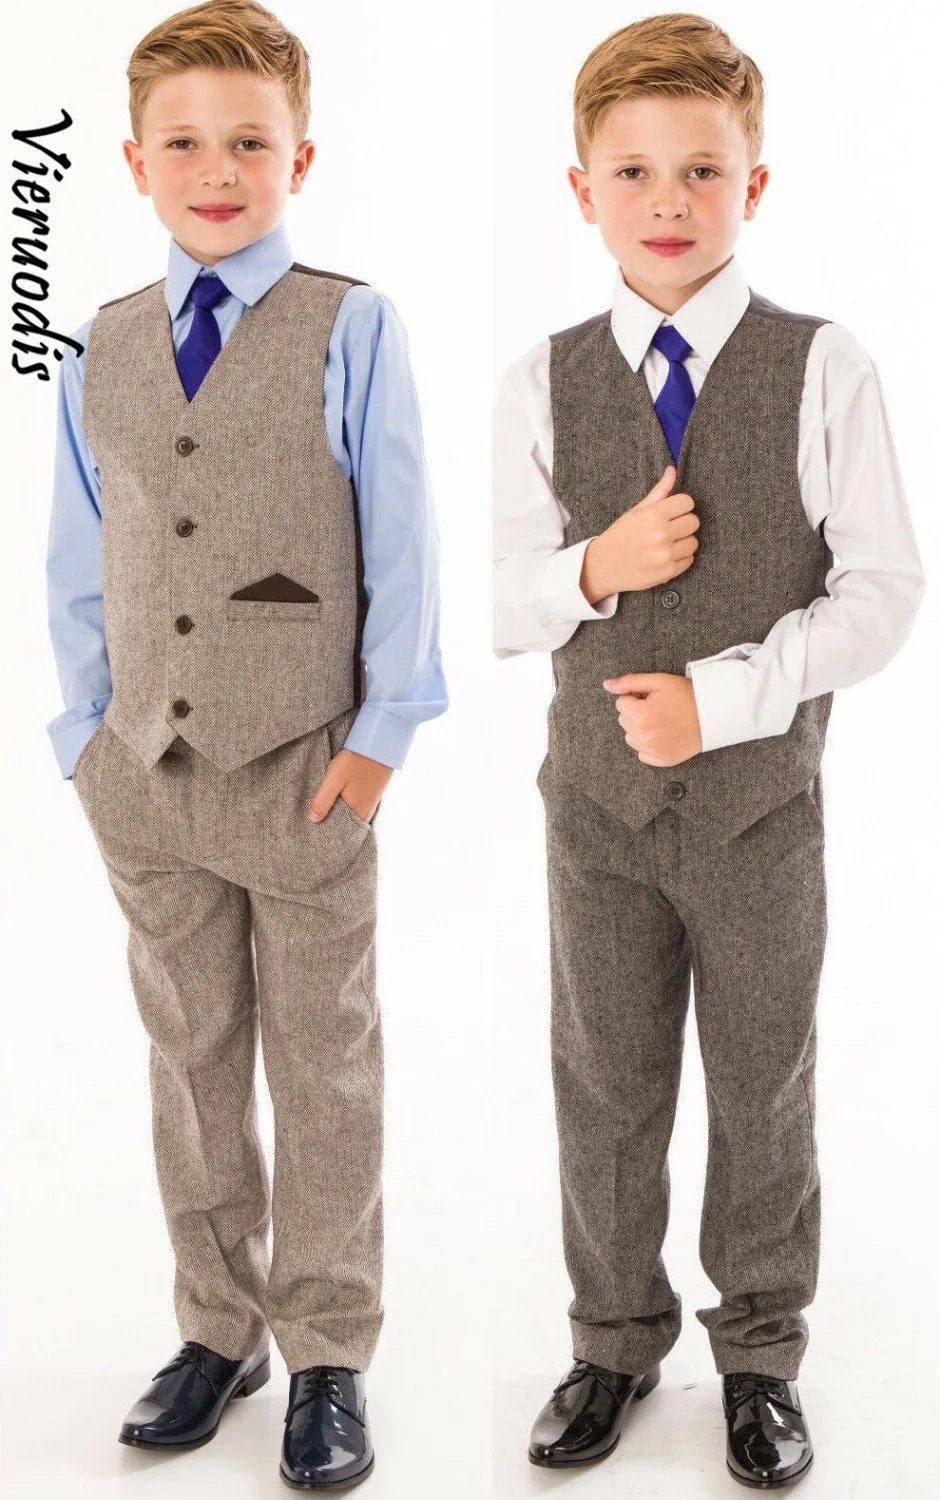 Boys Suits Boys Wedding Suit Tweed Waistcoat Suit Page Boy Baby Party Navy Suit 